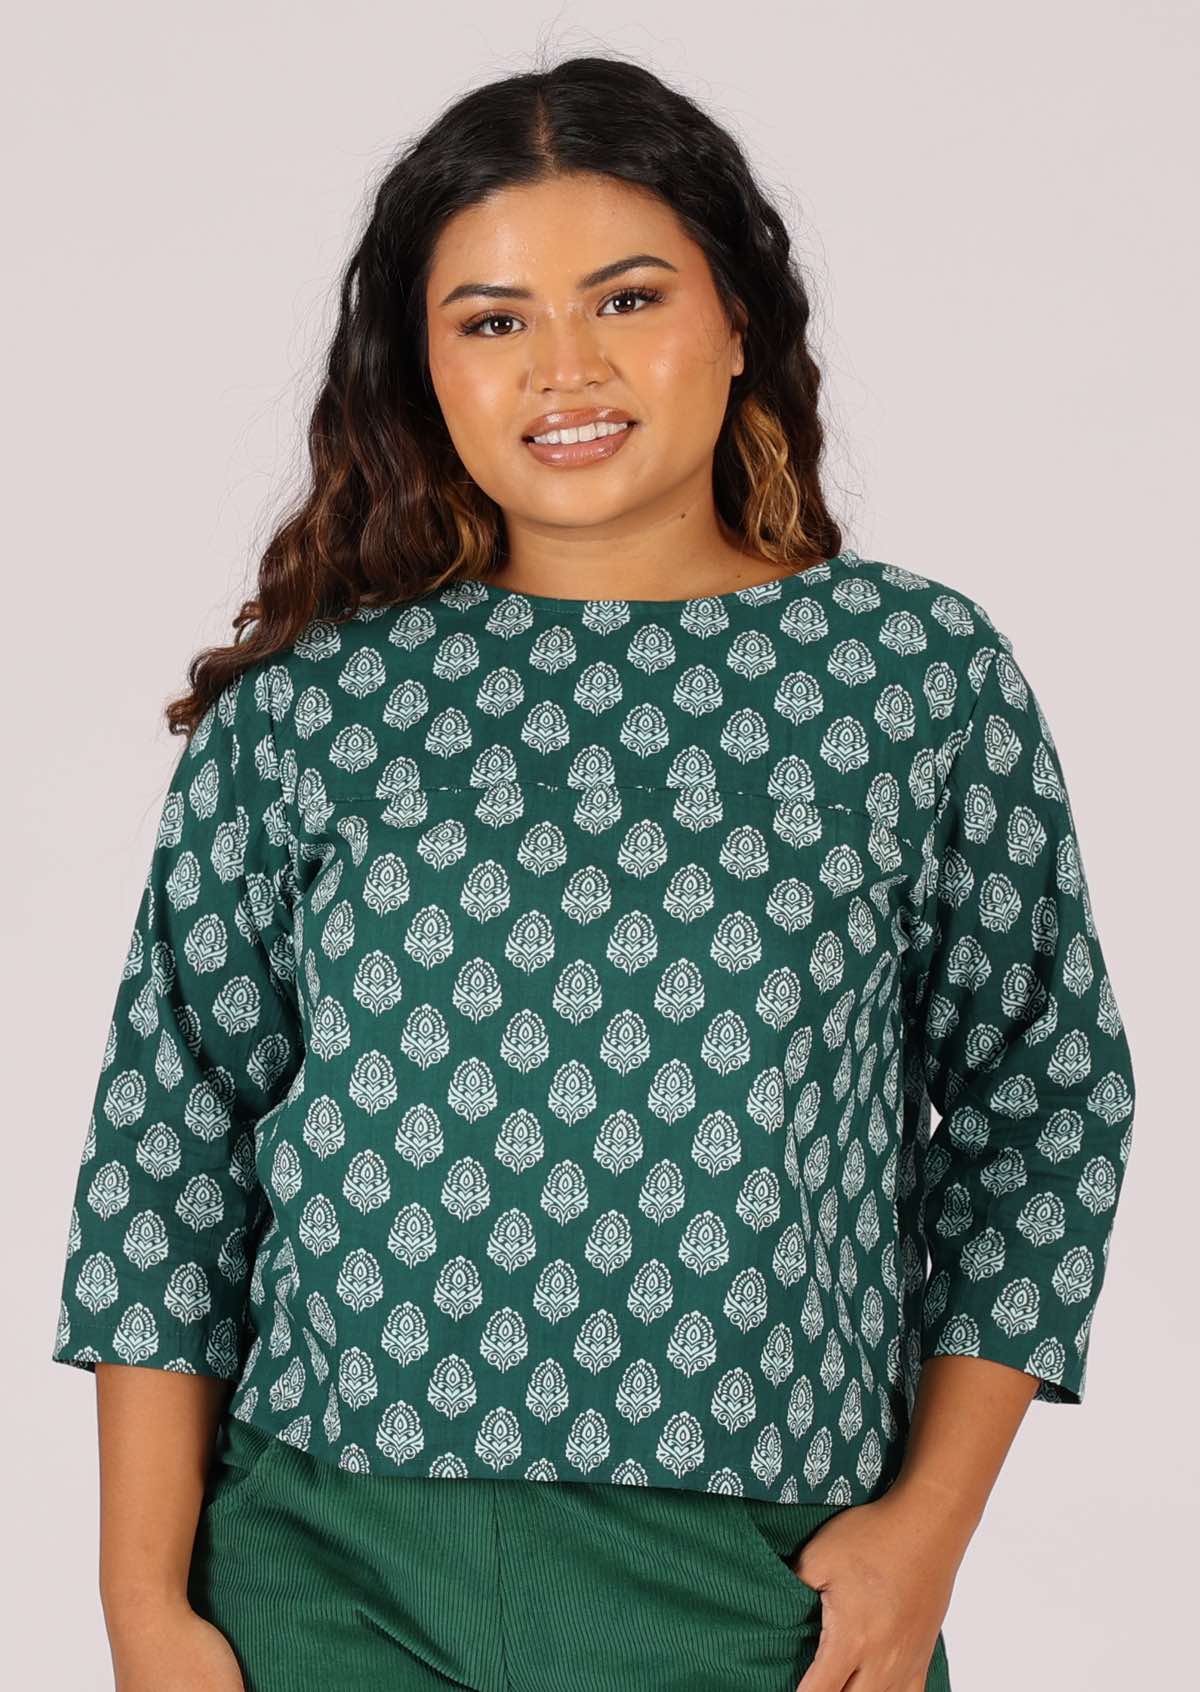 100% cotton loose fit top with 3/4 sleeves